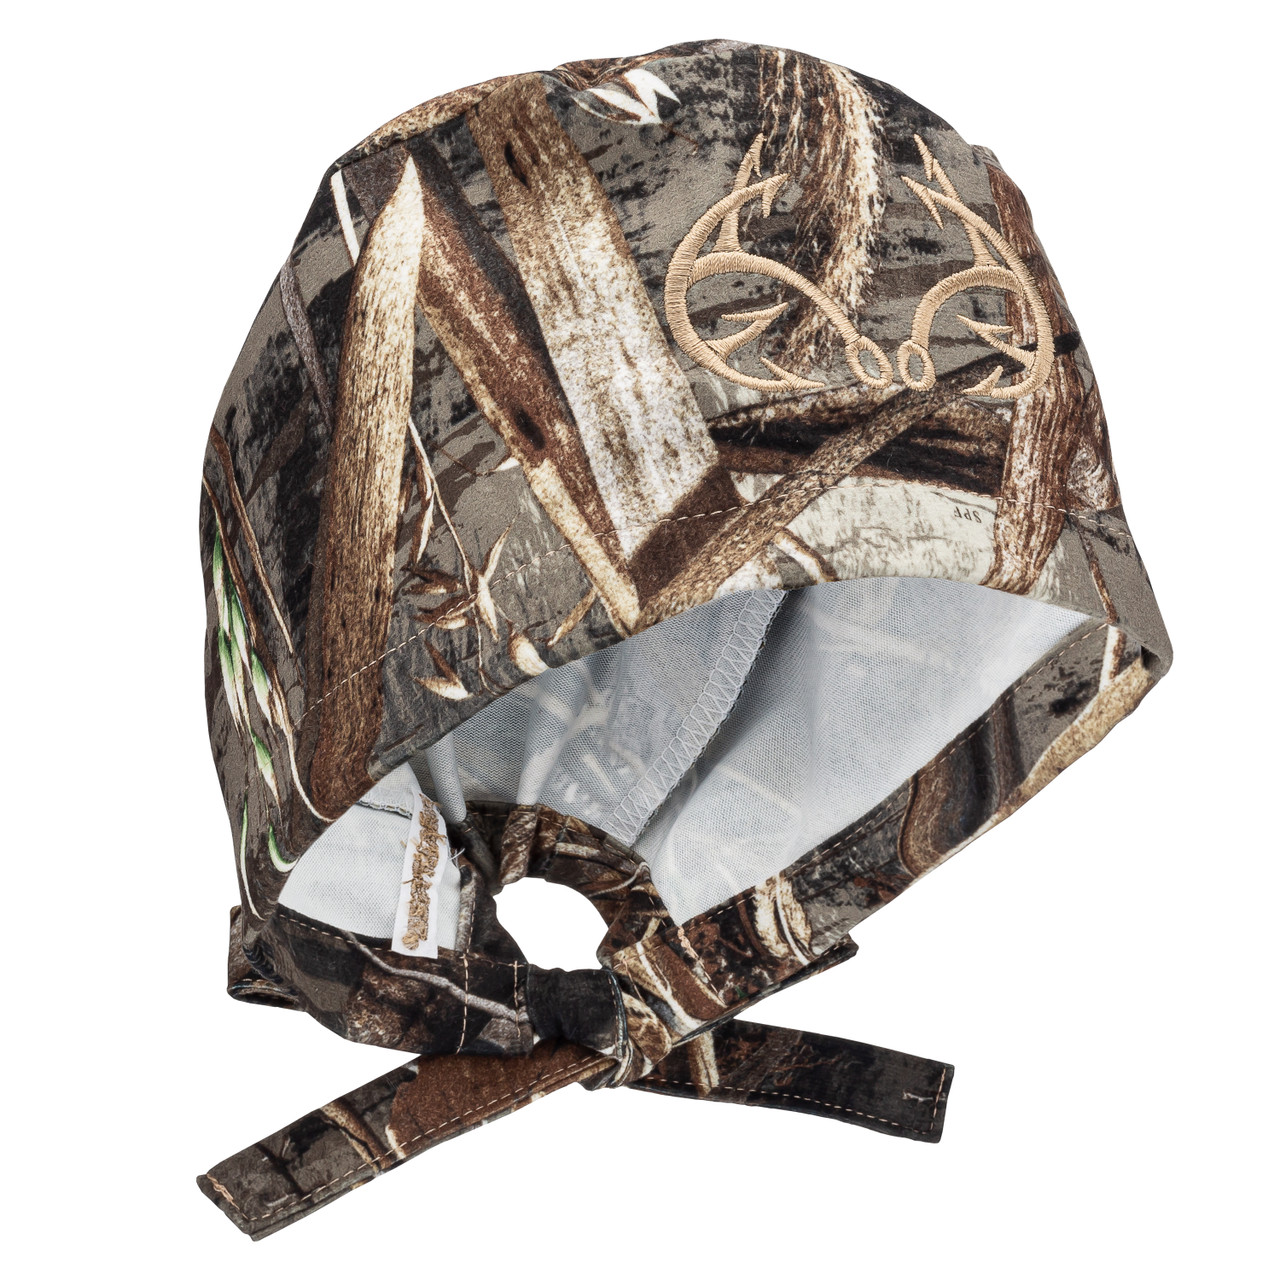 Realtree Camo Scrub Hat Officially Licensed with embroidered Fish-Hook logo